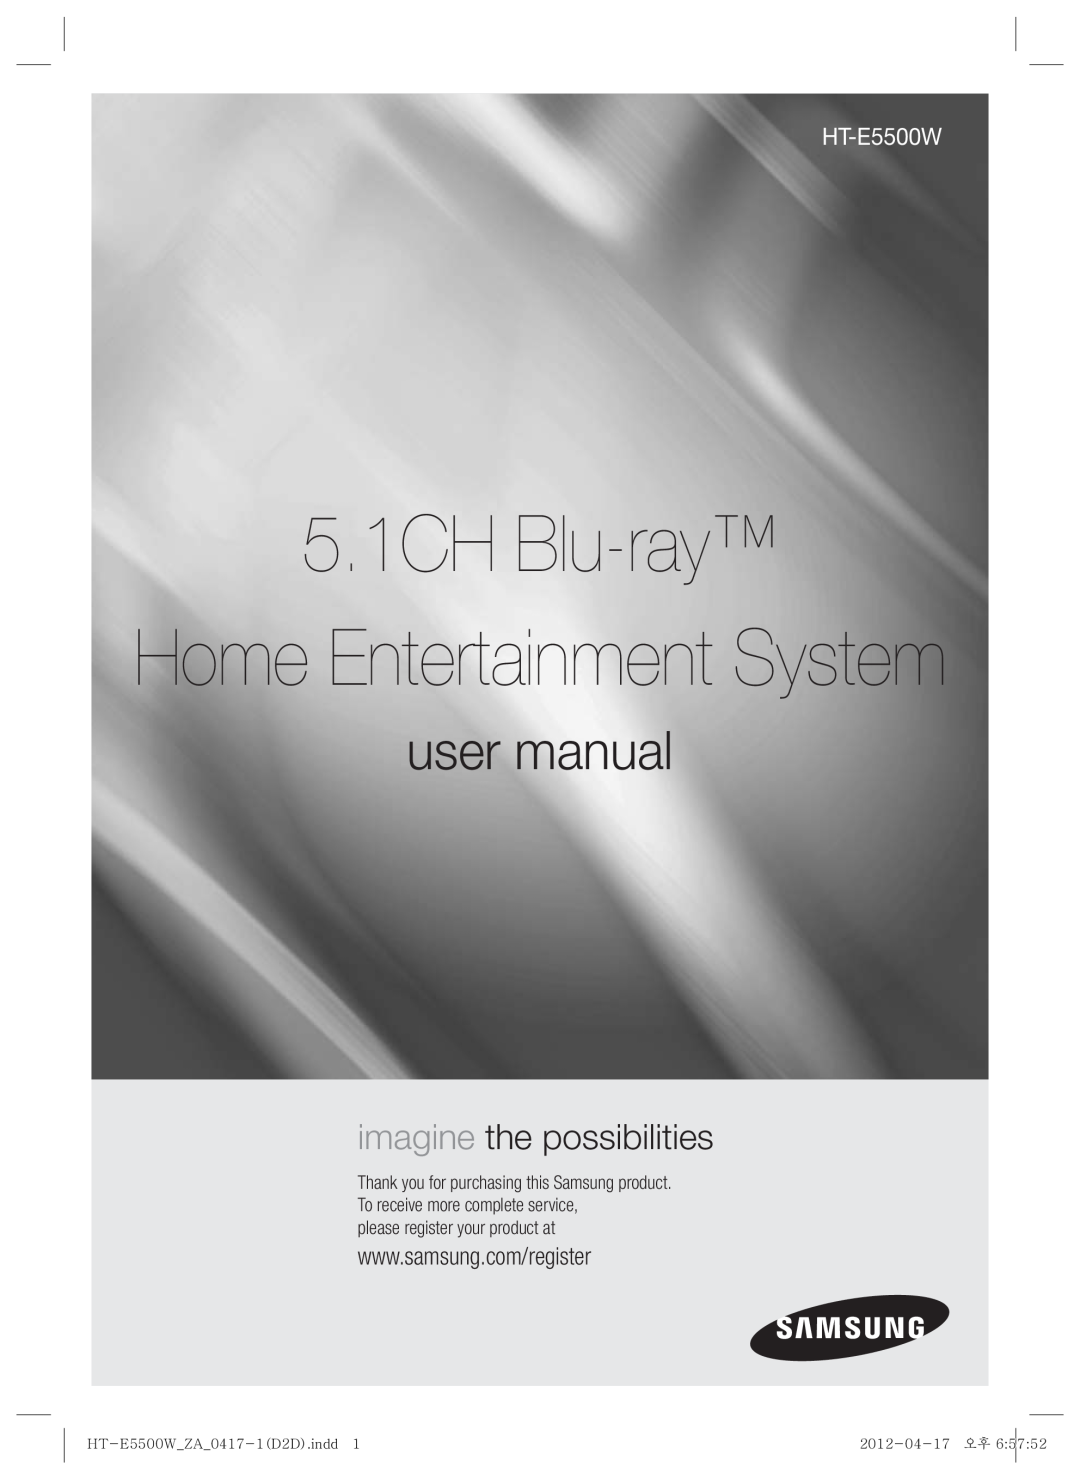 Samsung user manual HT-E5500W, 5.1CH Blu-ray, Home Entertainment System, imagine the possibilities 